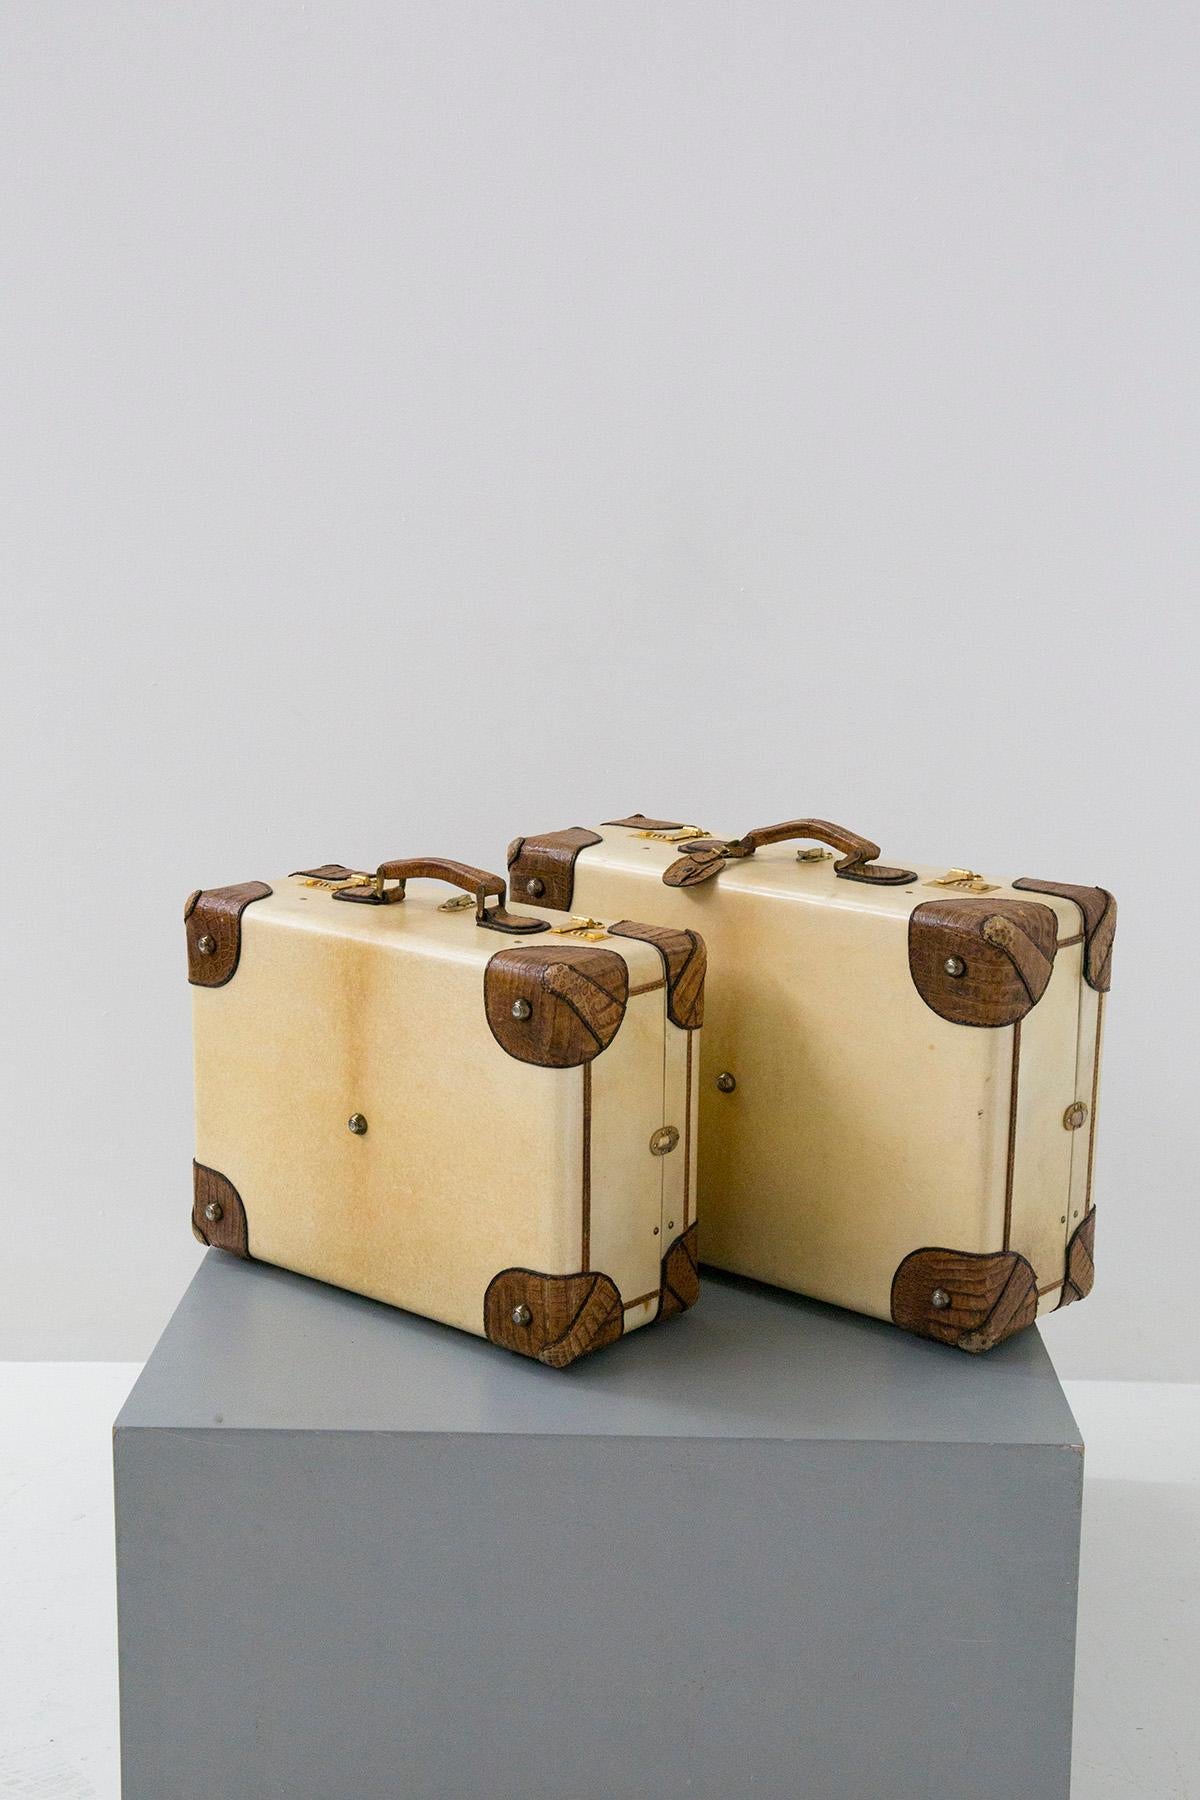 Elegant and magnificent pair of Parchment and crocodile suitcases from the great Chloé manufacture. The suitcases date from the late 1950s. The pair of suitcases have a rigid frame covered in yellow parchment and their greatest beauty is its